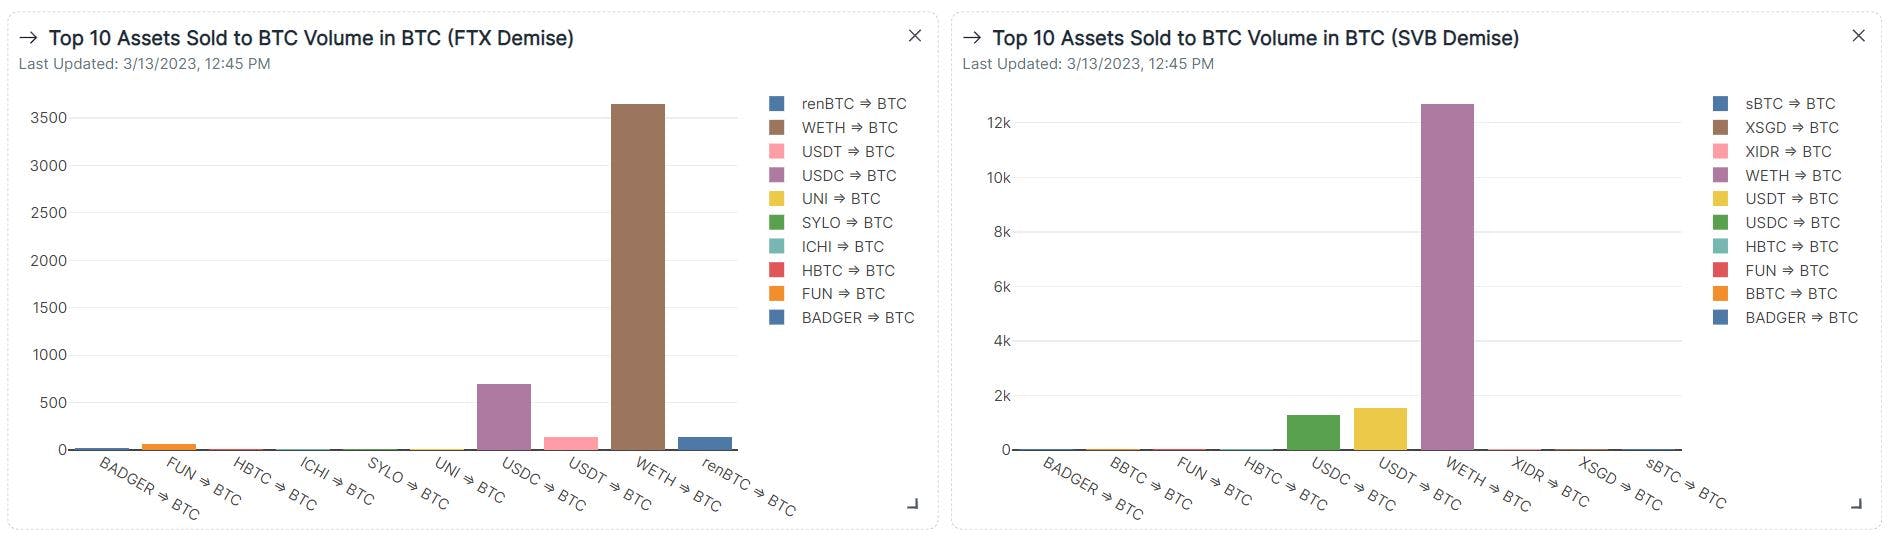 Top 10 most volume(in BTC) assets swapped to BTC